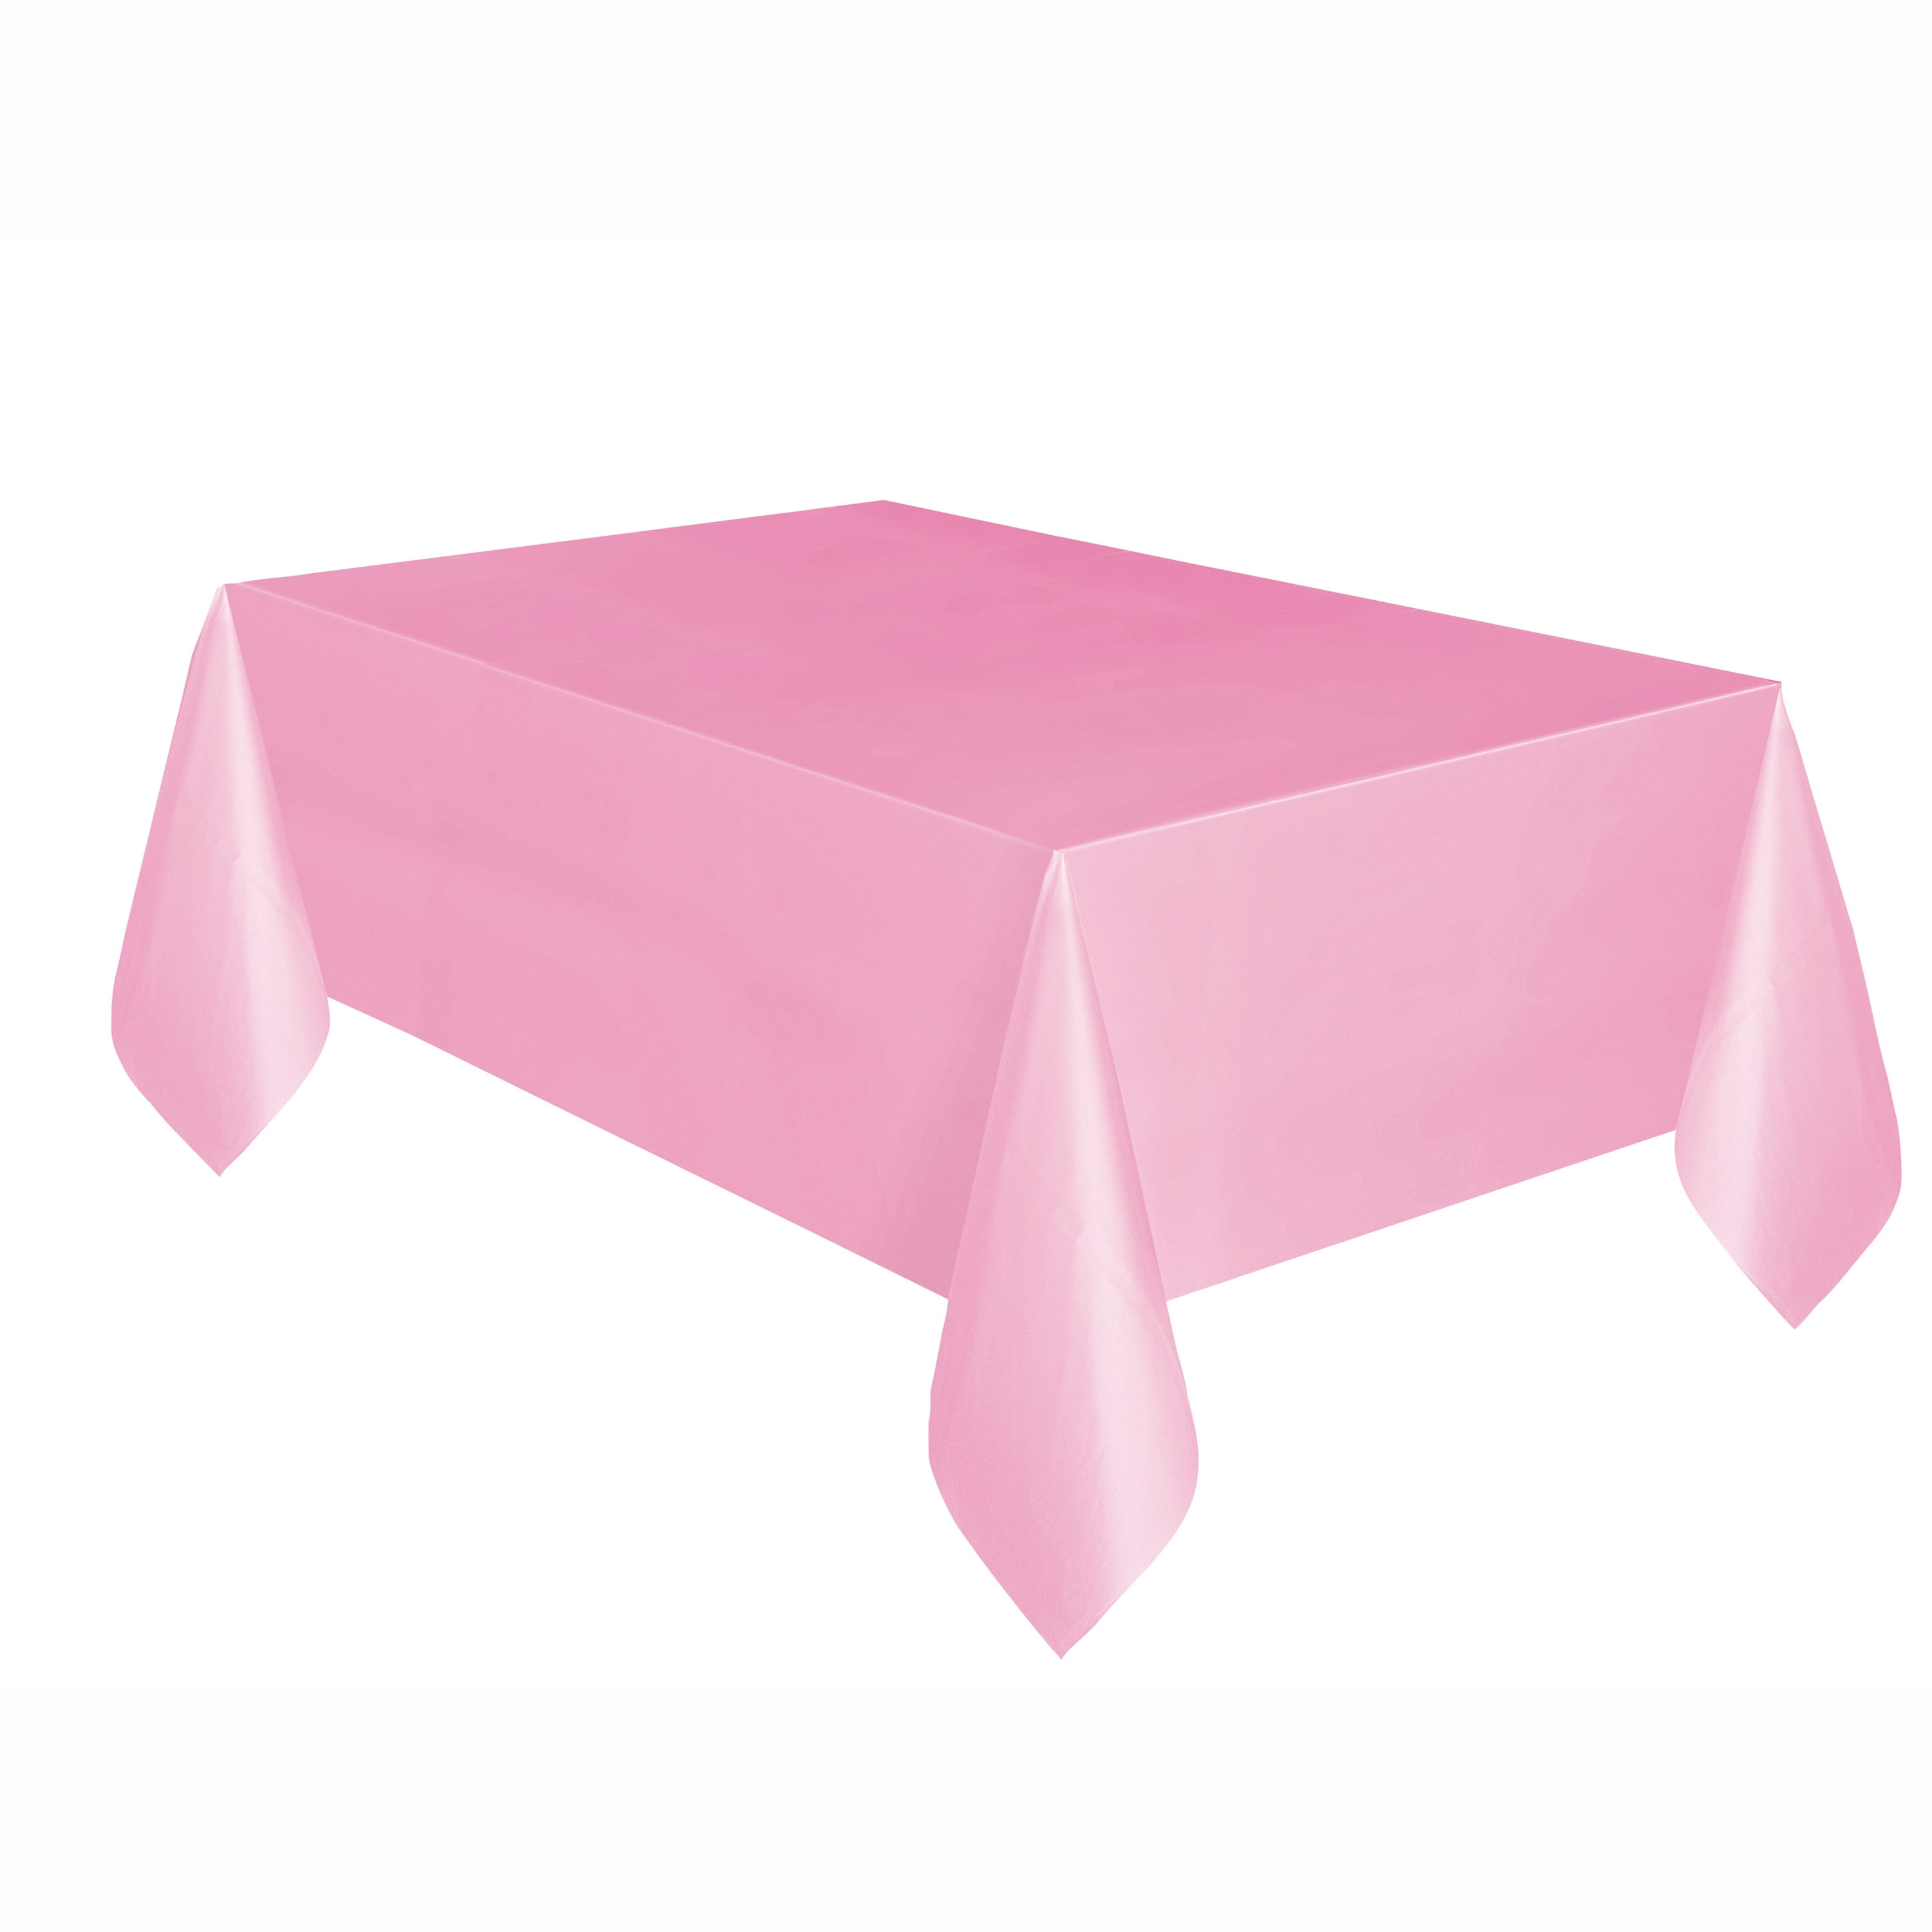 Gender Reveal Party Plastic Tablecloth He or She 54 x 108 in, 3 Pack 